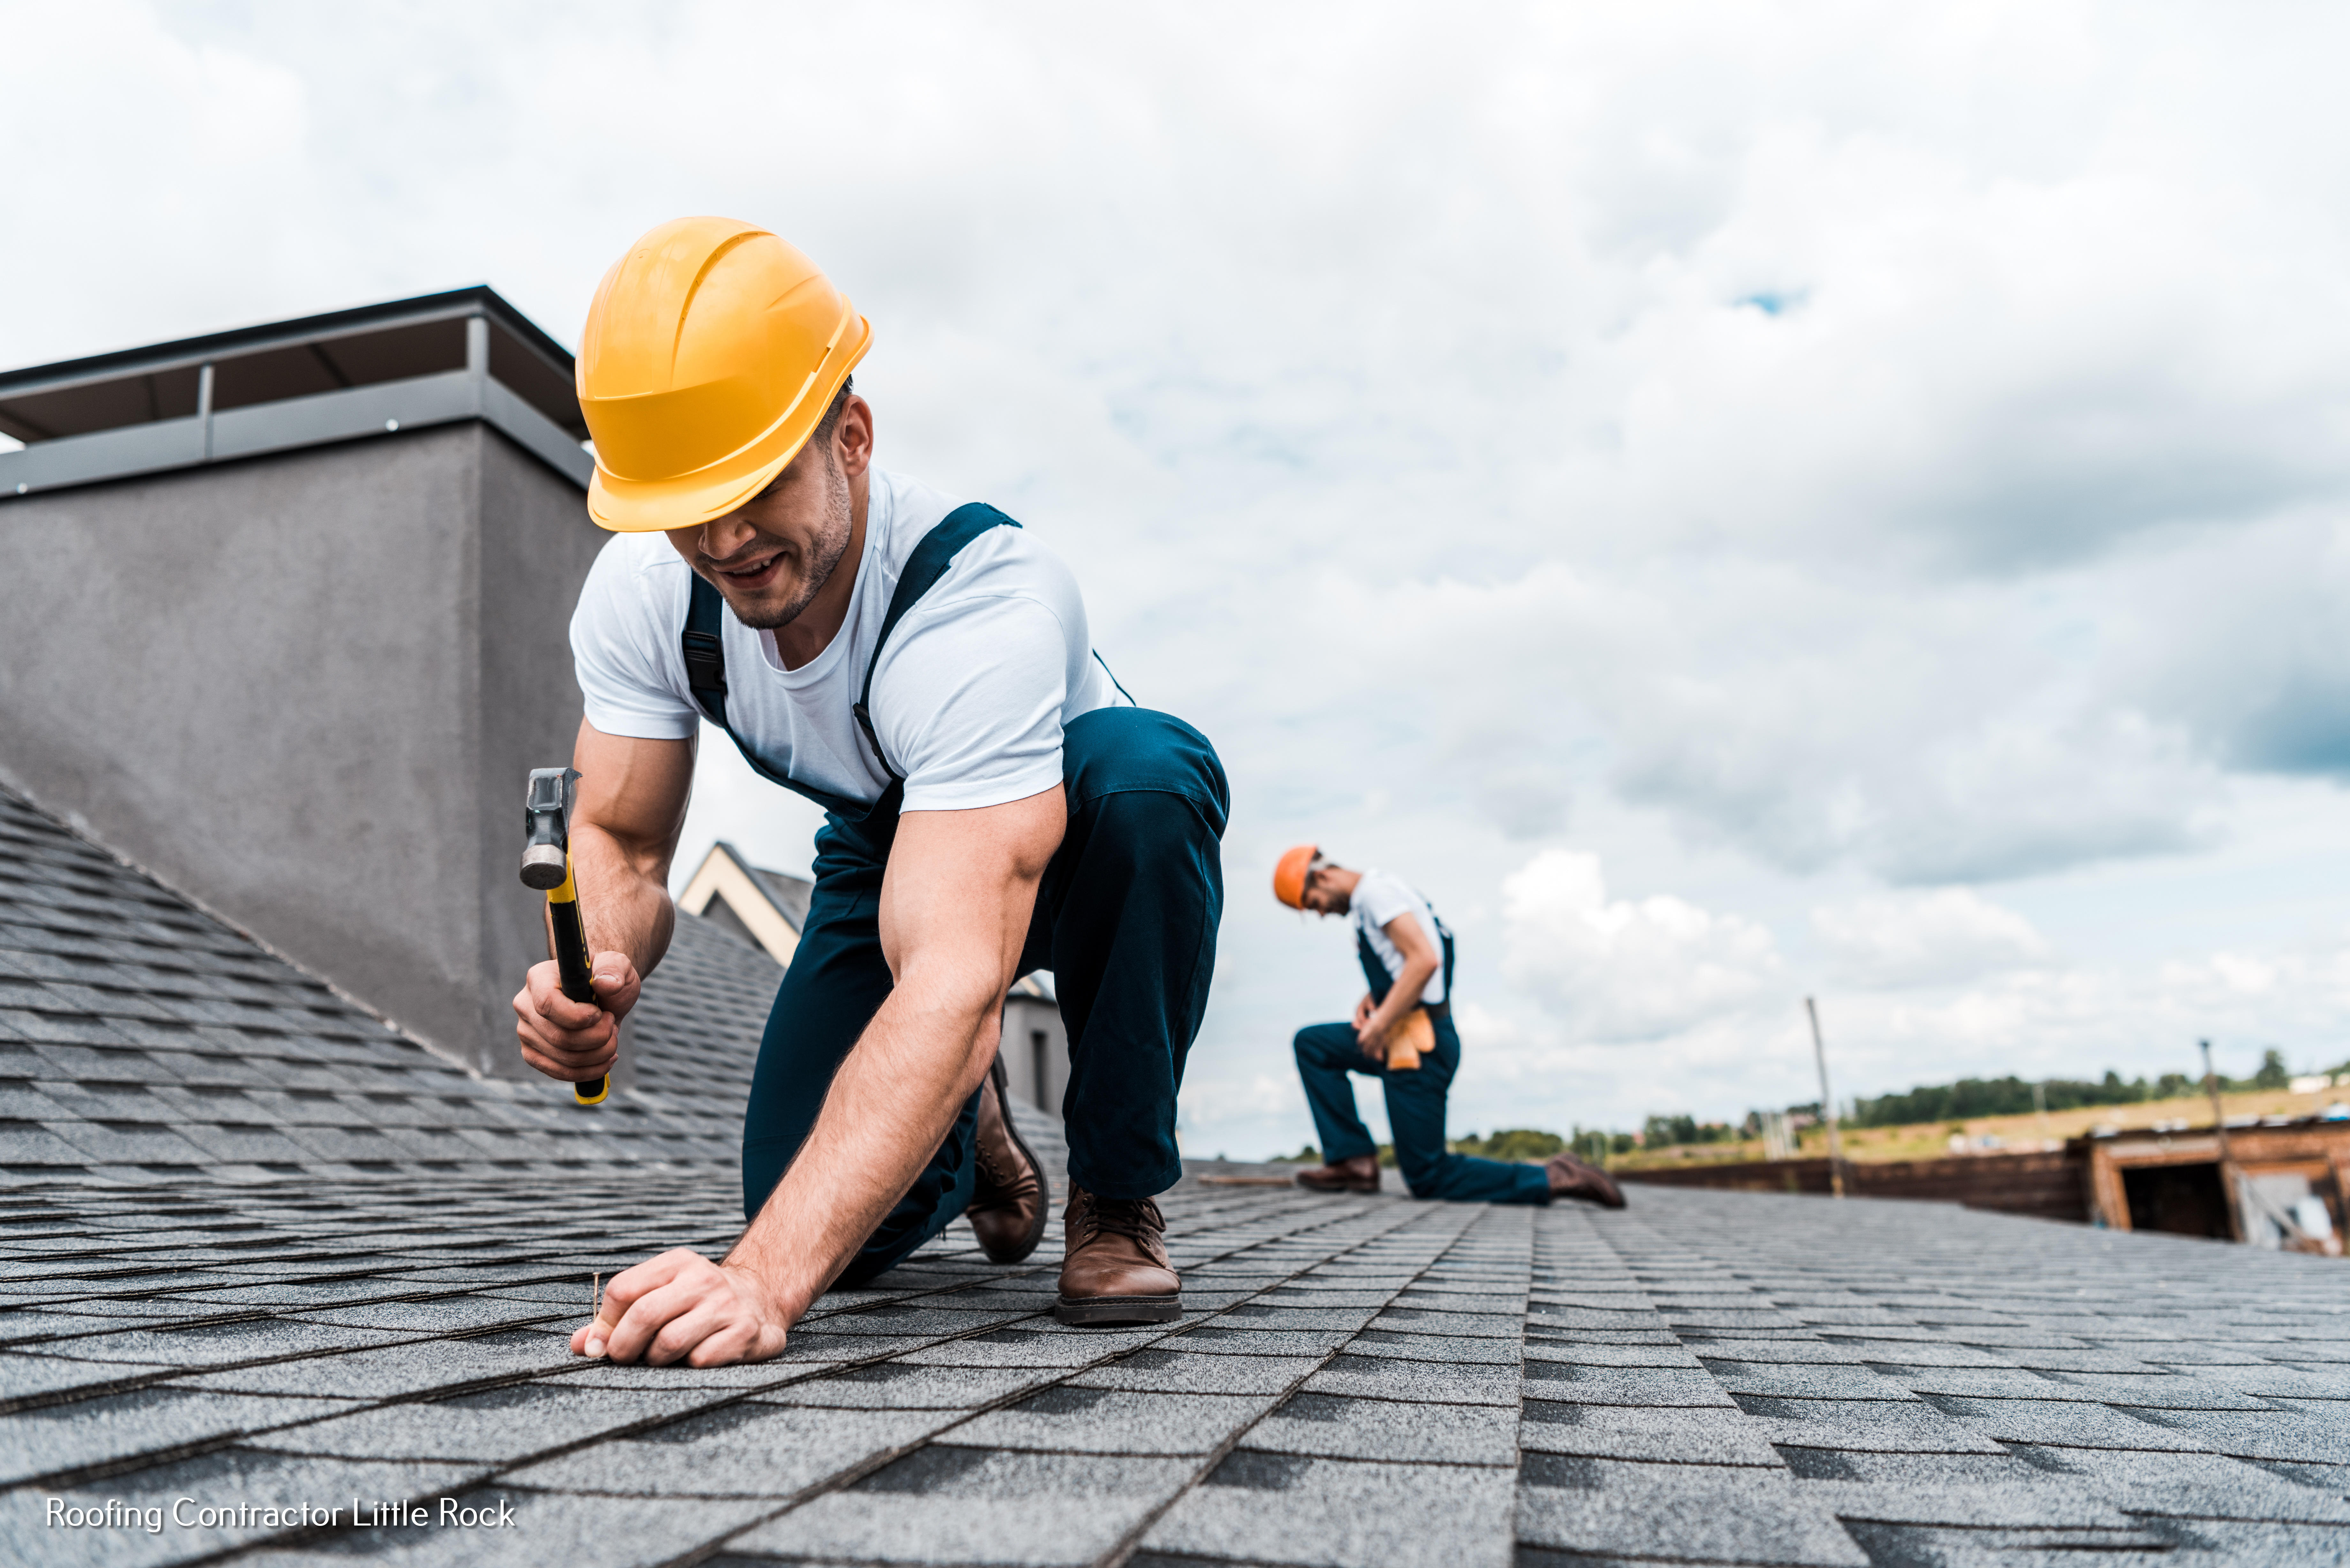 Little Rock Roofing & Flat Roof Advises Property Owners Against DIY Roofing